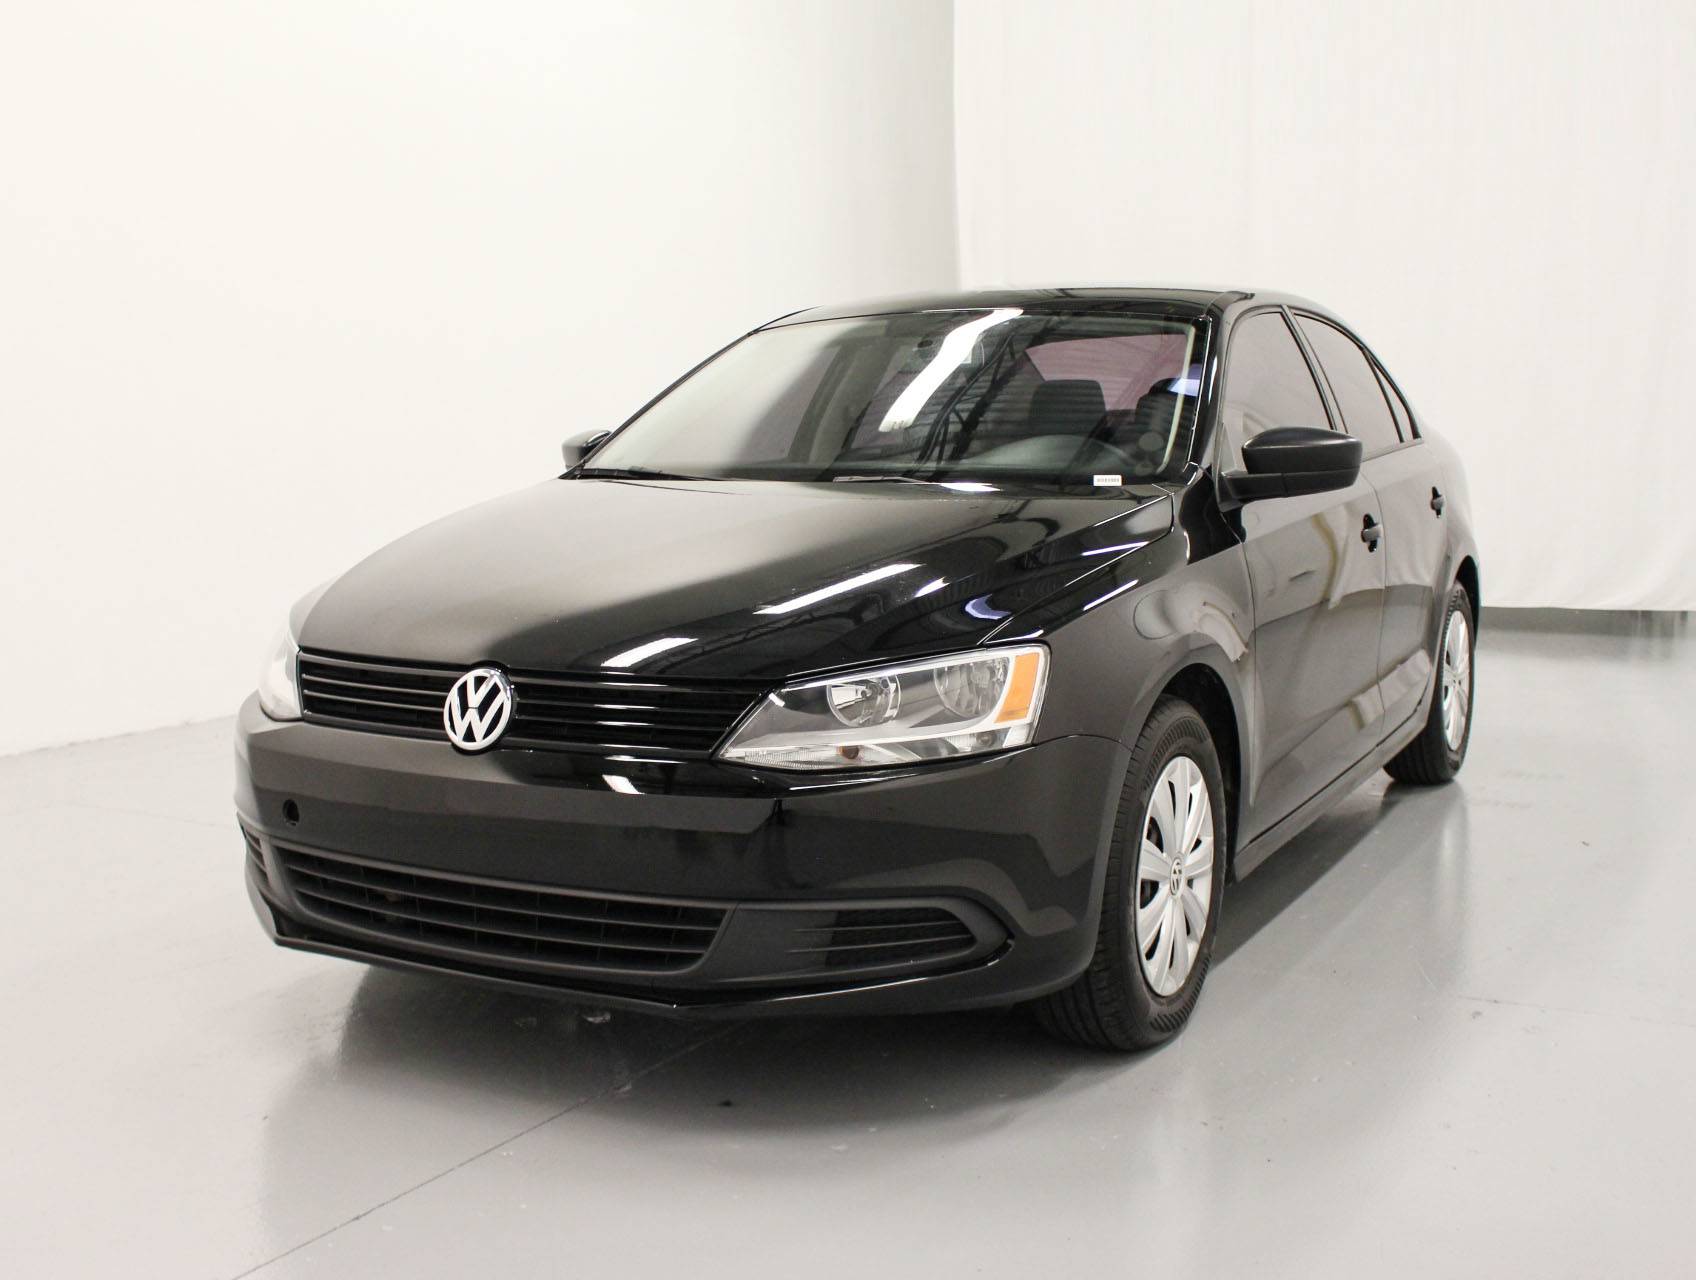 Florida Fine Cars - Used VOLKSWAGEN PASSAT 2015 WEST PALM Limited